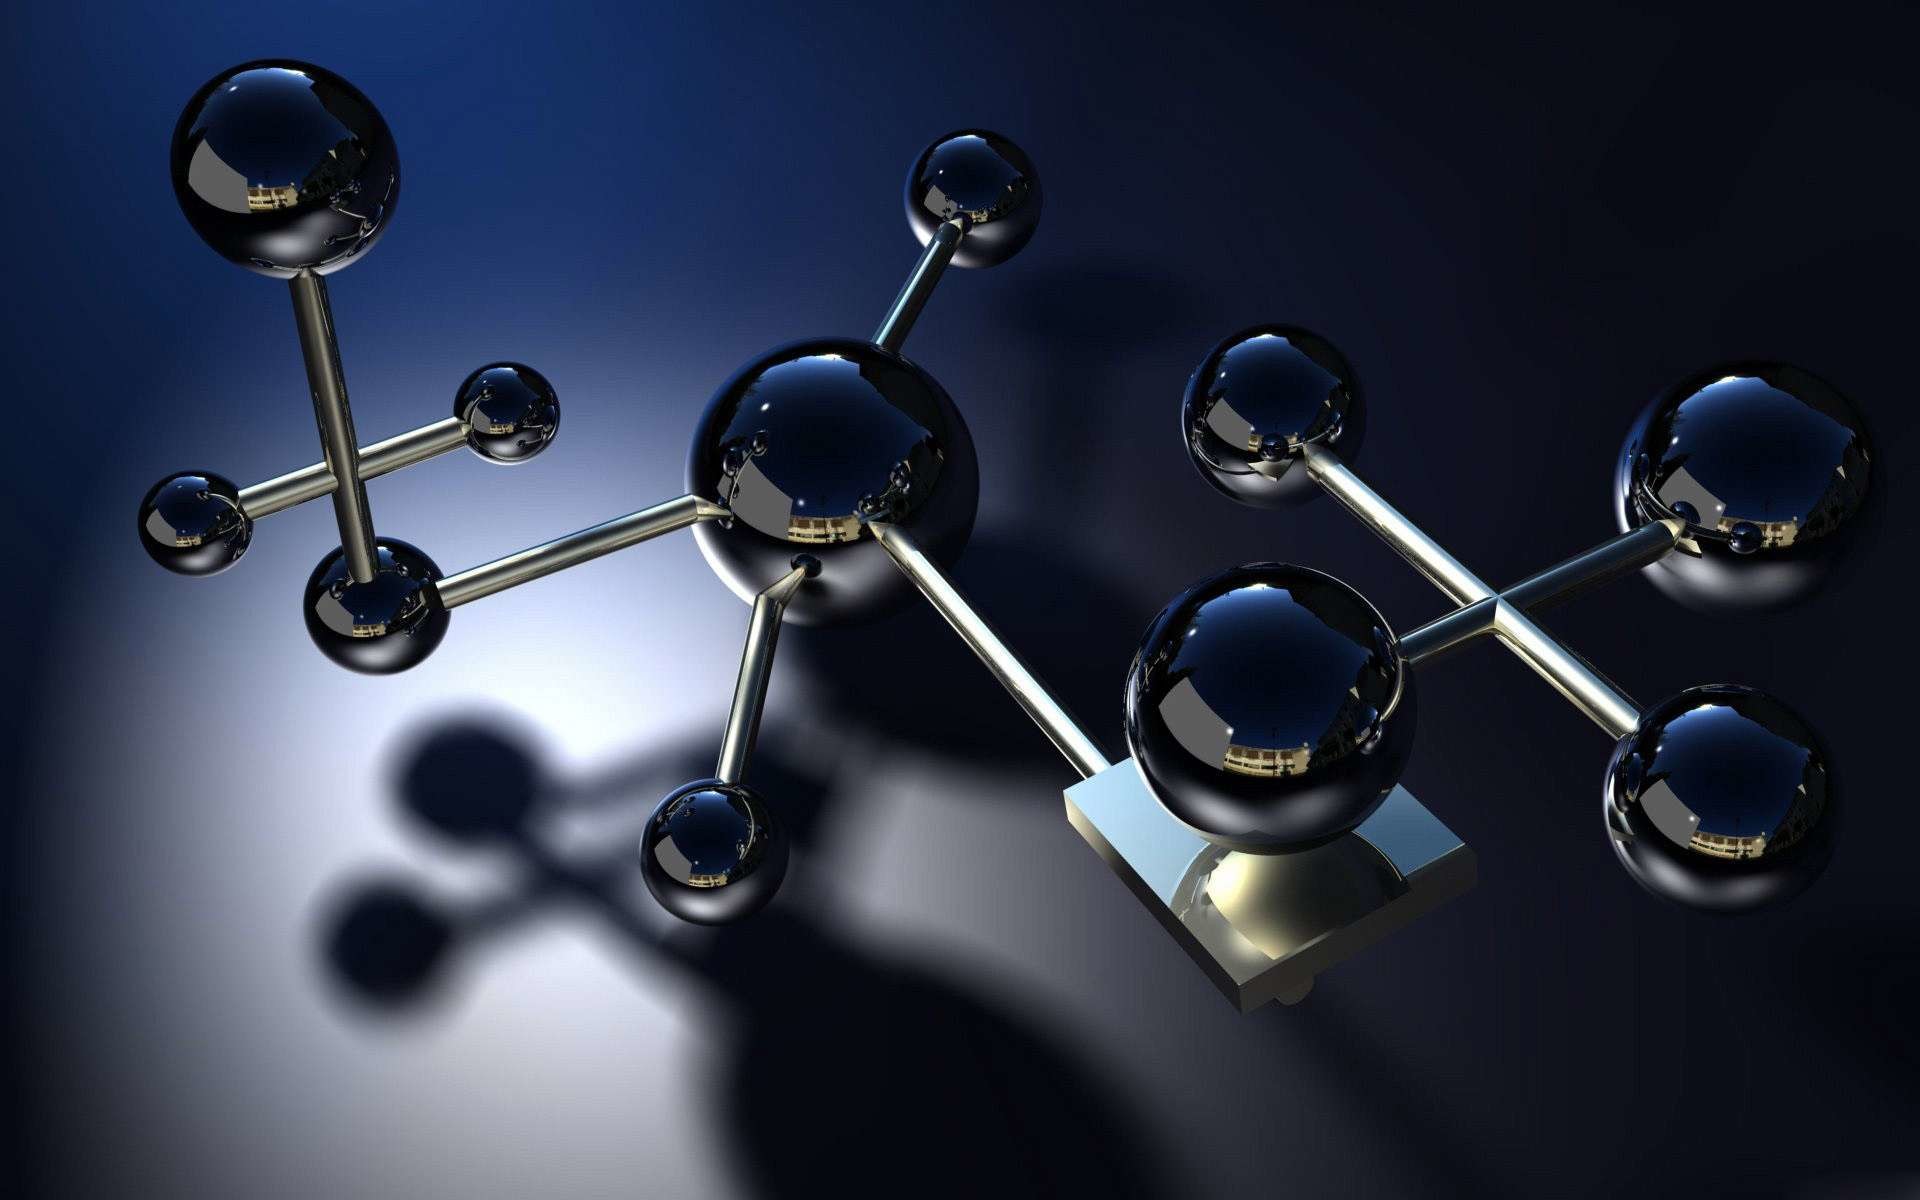 1920x1200 Physics And Chemistry Computer Wallpapers, Desktop Backgrounds .